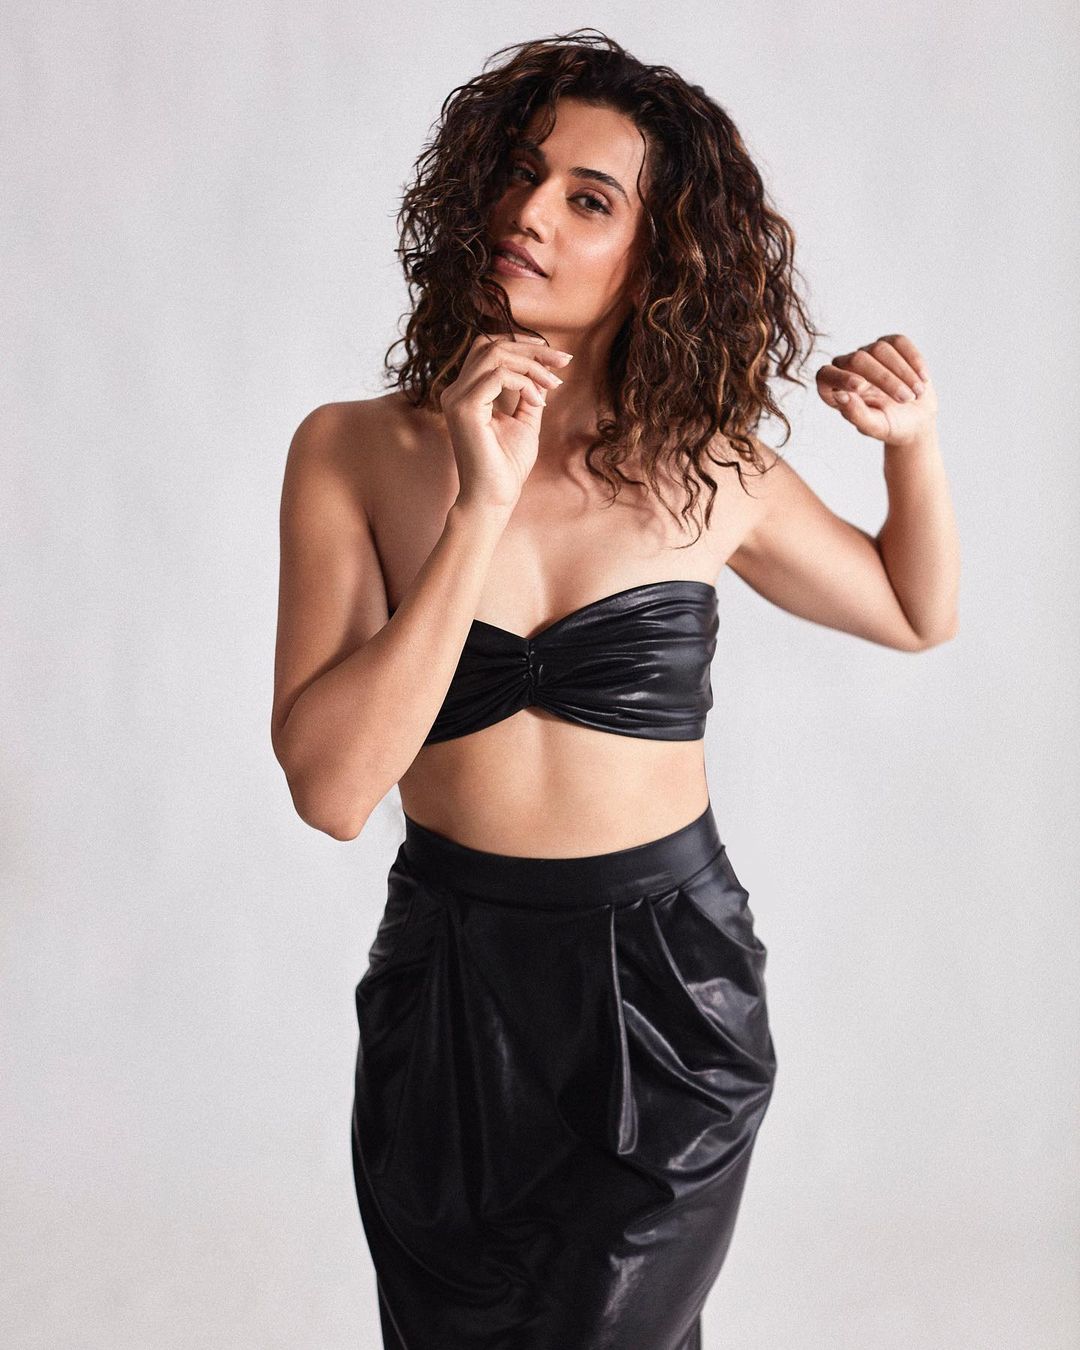 Actress tapsee pannu spells magic with her bold looks-Taapsee Latest, Taapseepannu, Taapsee Pannu Photos,Spicy Hot Pics,Images,High Resolution WallPapers Download